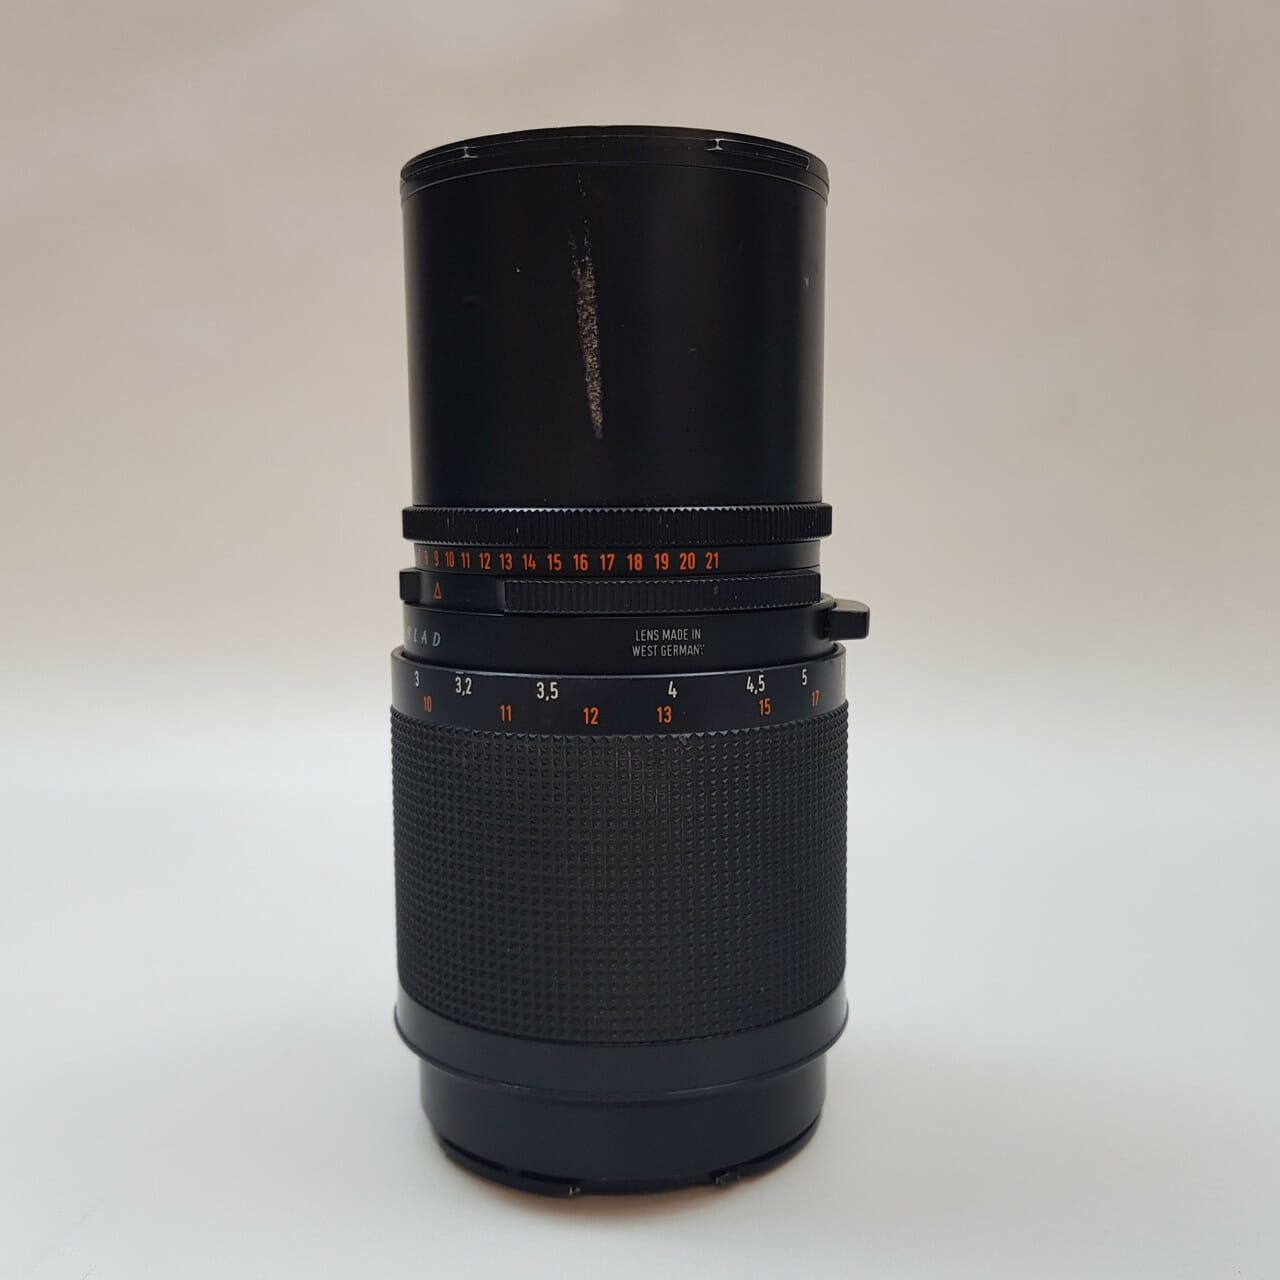 HASSELBLAD ZEISS SONNAR 250MM F/5.6 CF T* CAMERA LENS #53274